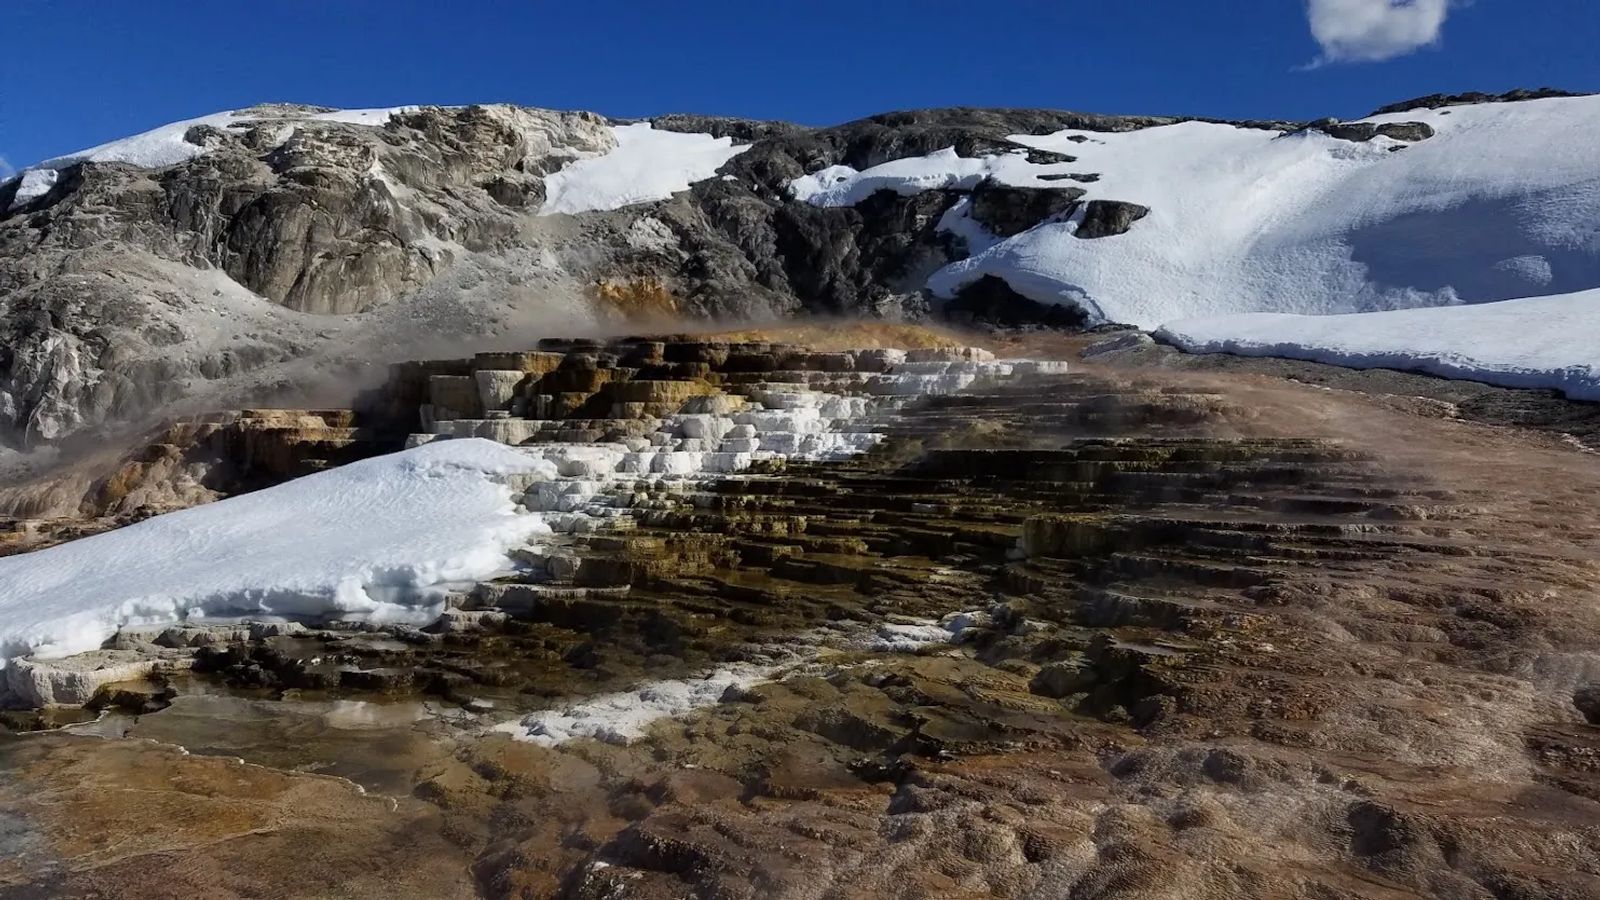 Photo of The Cleopatra Terrace at Mammoth Hot Springs, in Yellowstone National Park